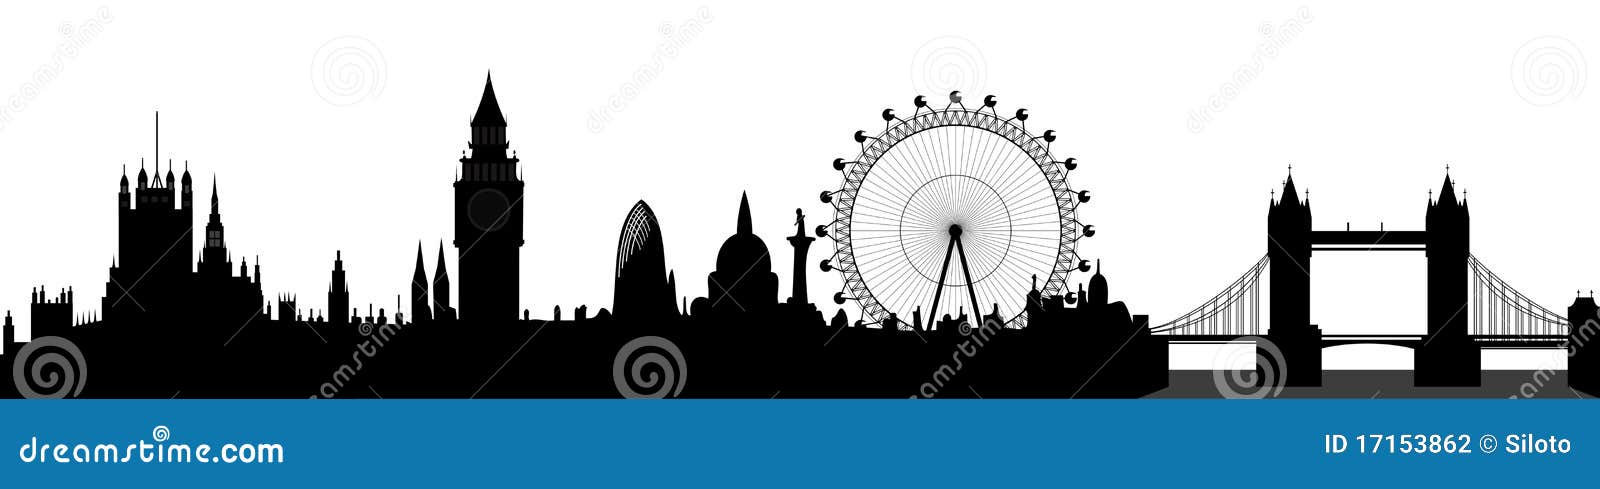 london clipart free download - photo #39